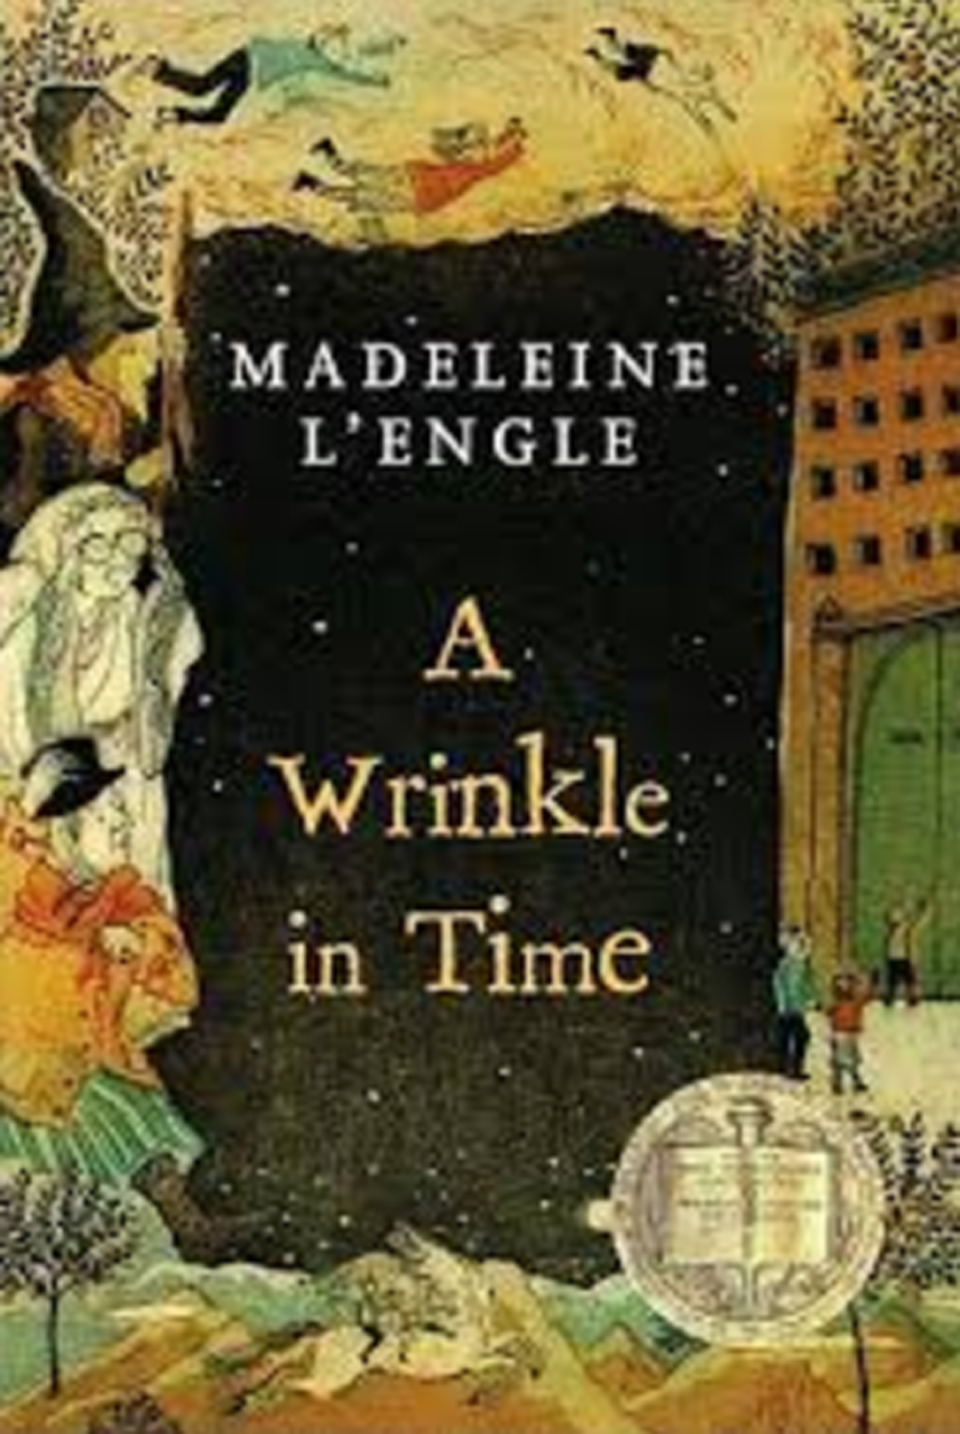 A Wrinkle in Time by Madeleine L’Engle